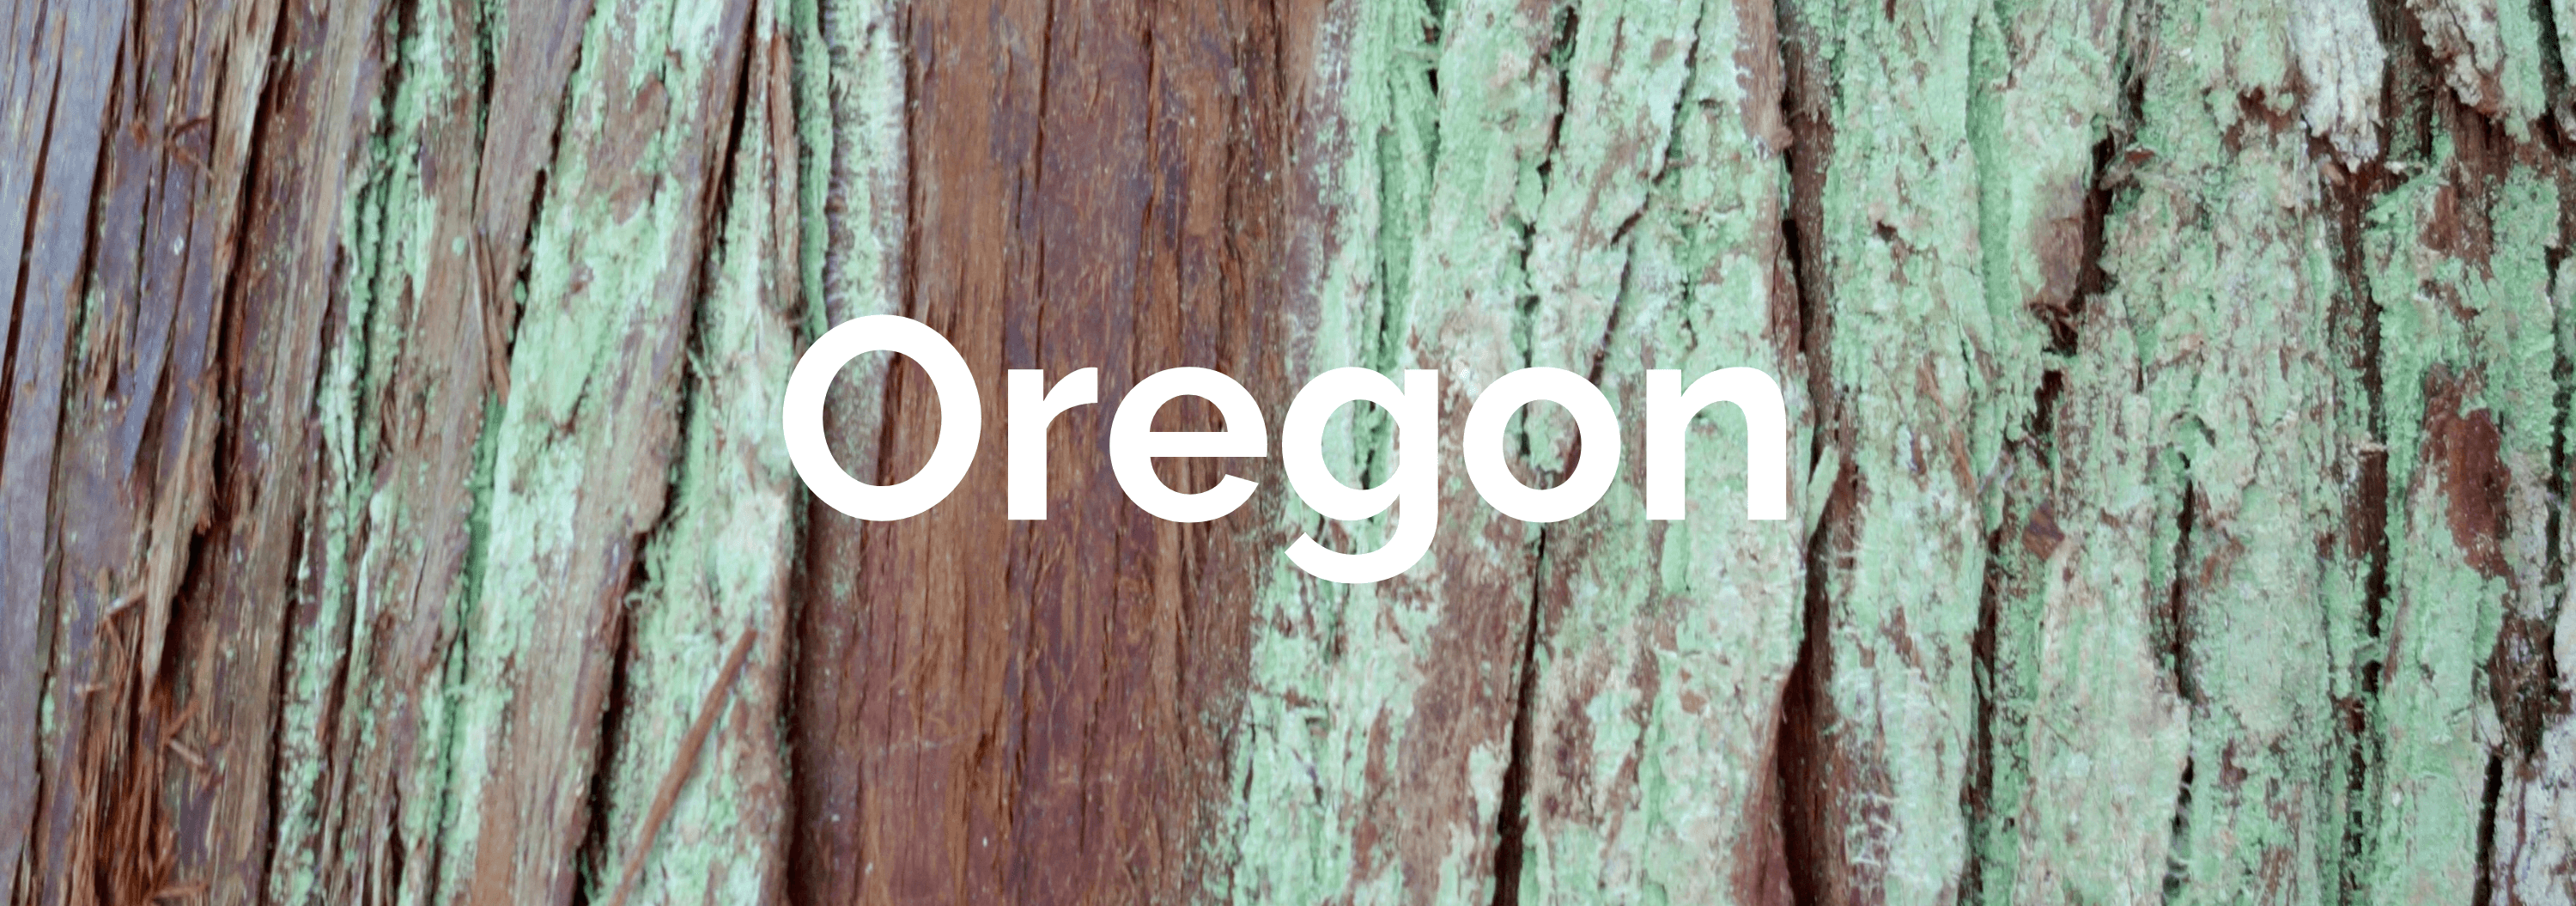 Tile of Cedar Bark that is brown and a moldy green color with the word Oregon in White.